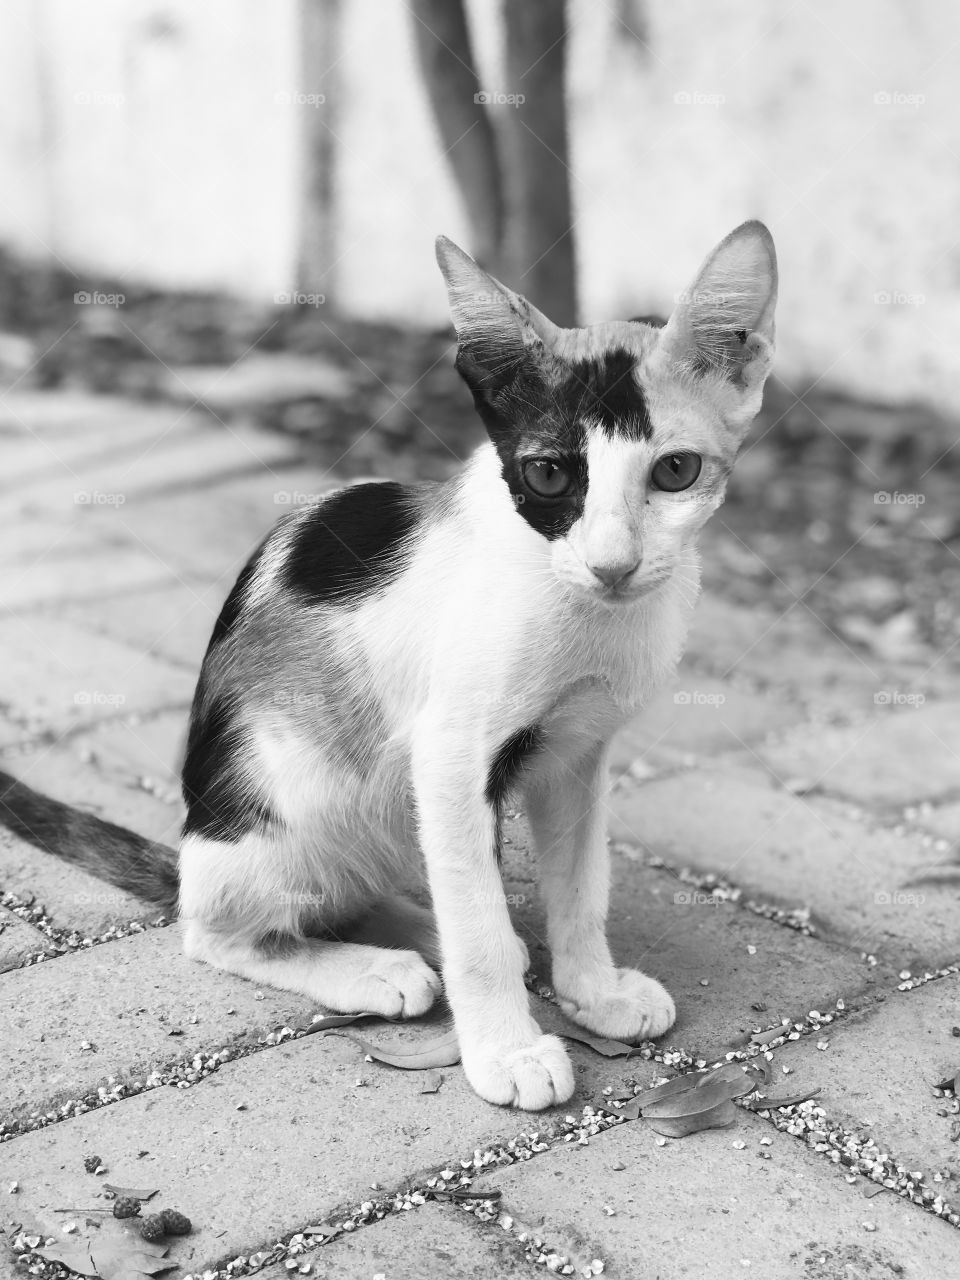 Black and white portrait of a kitten.